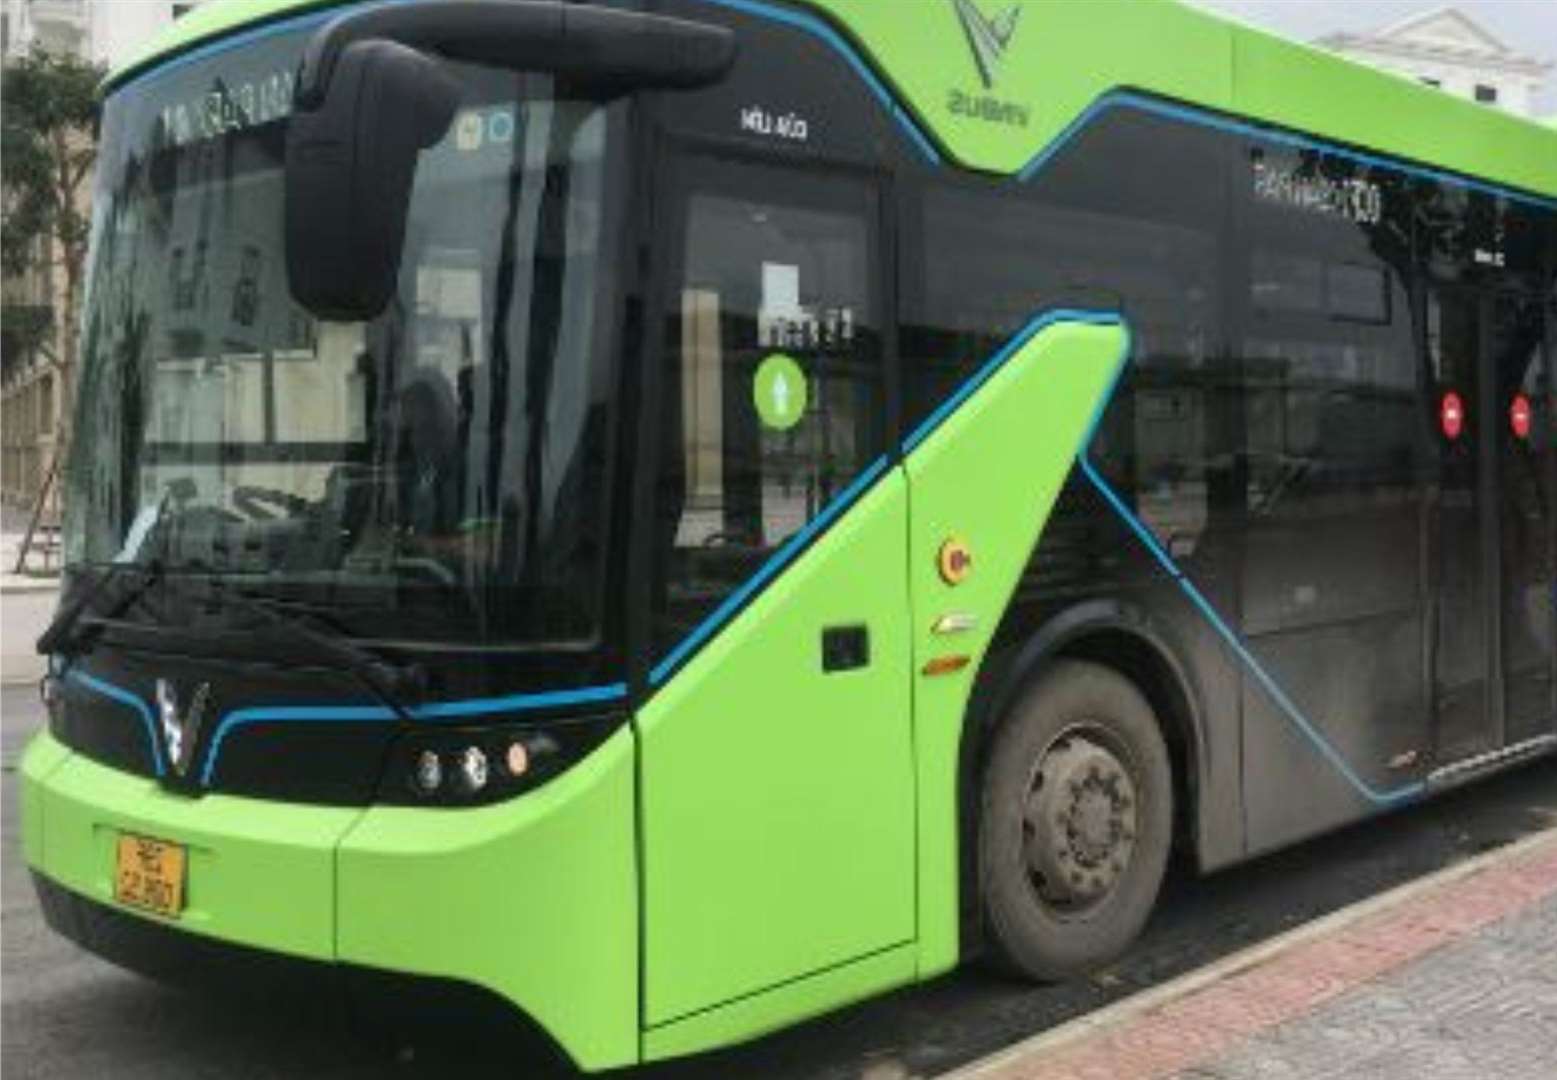 Moray to get five electric buses initially, with the fleet potentially rising in number to about 20.